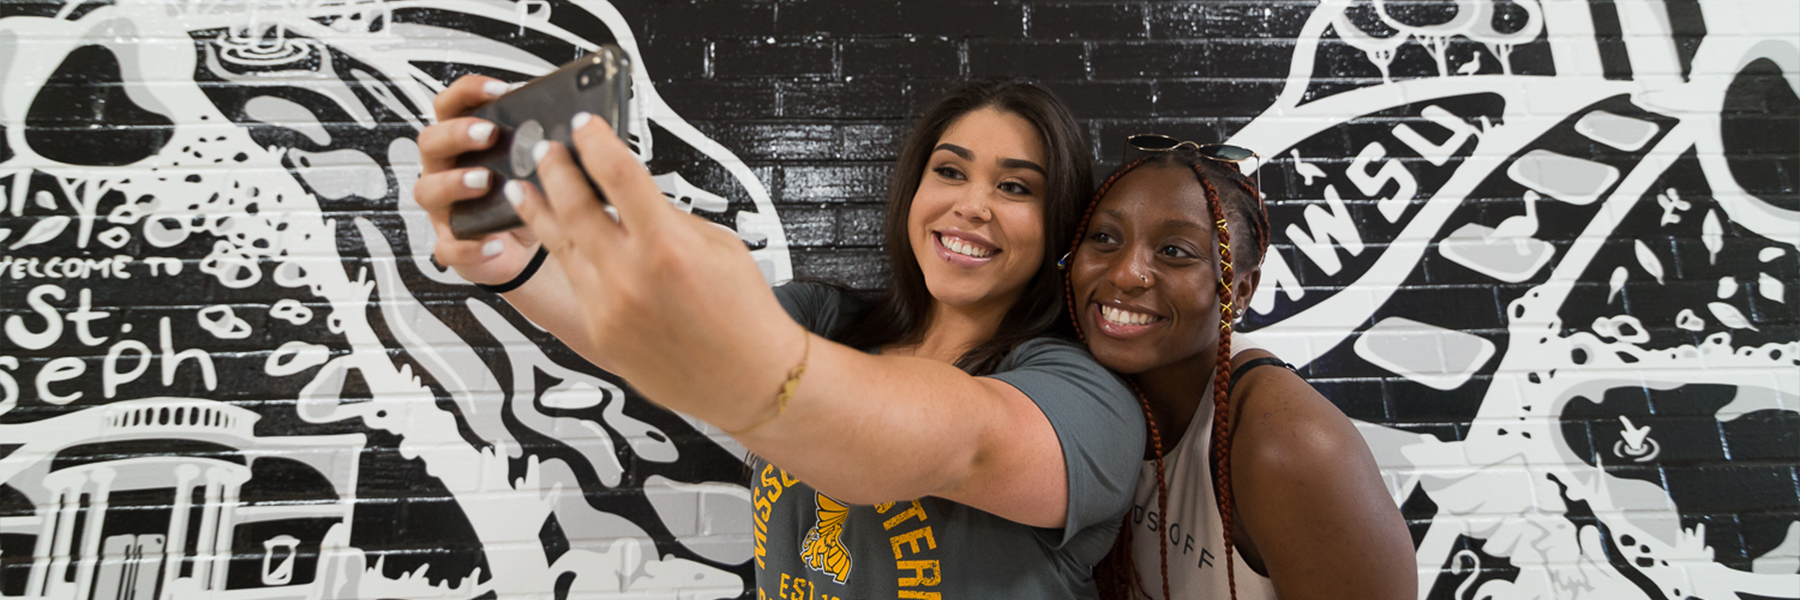 two students taking a selfie in front of a mural of wings